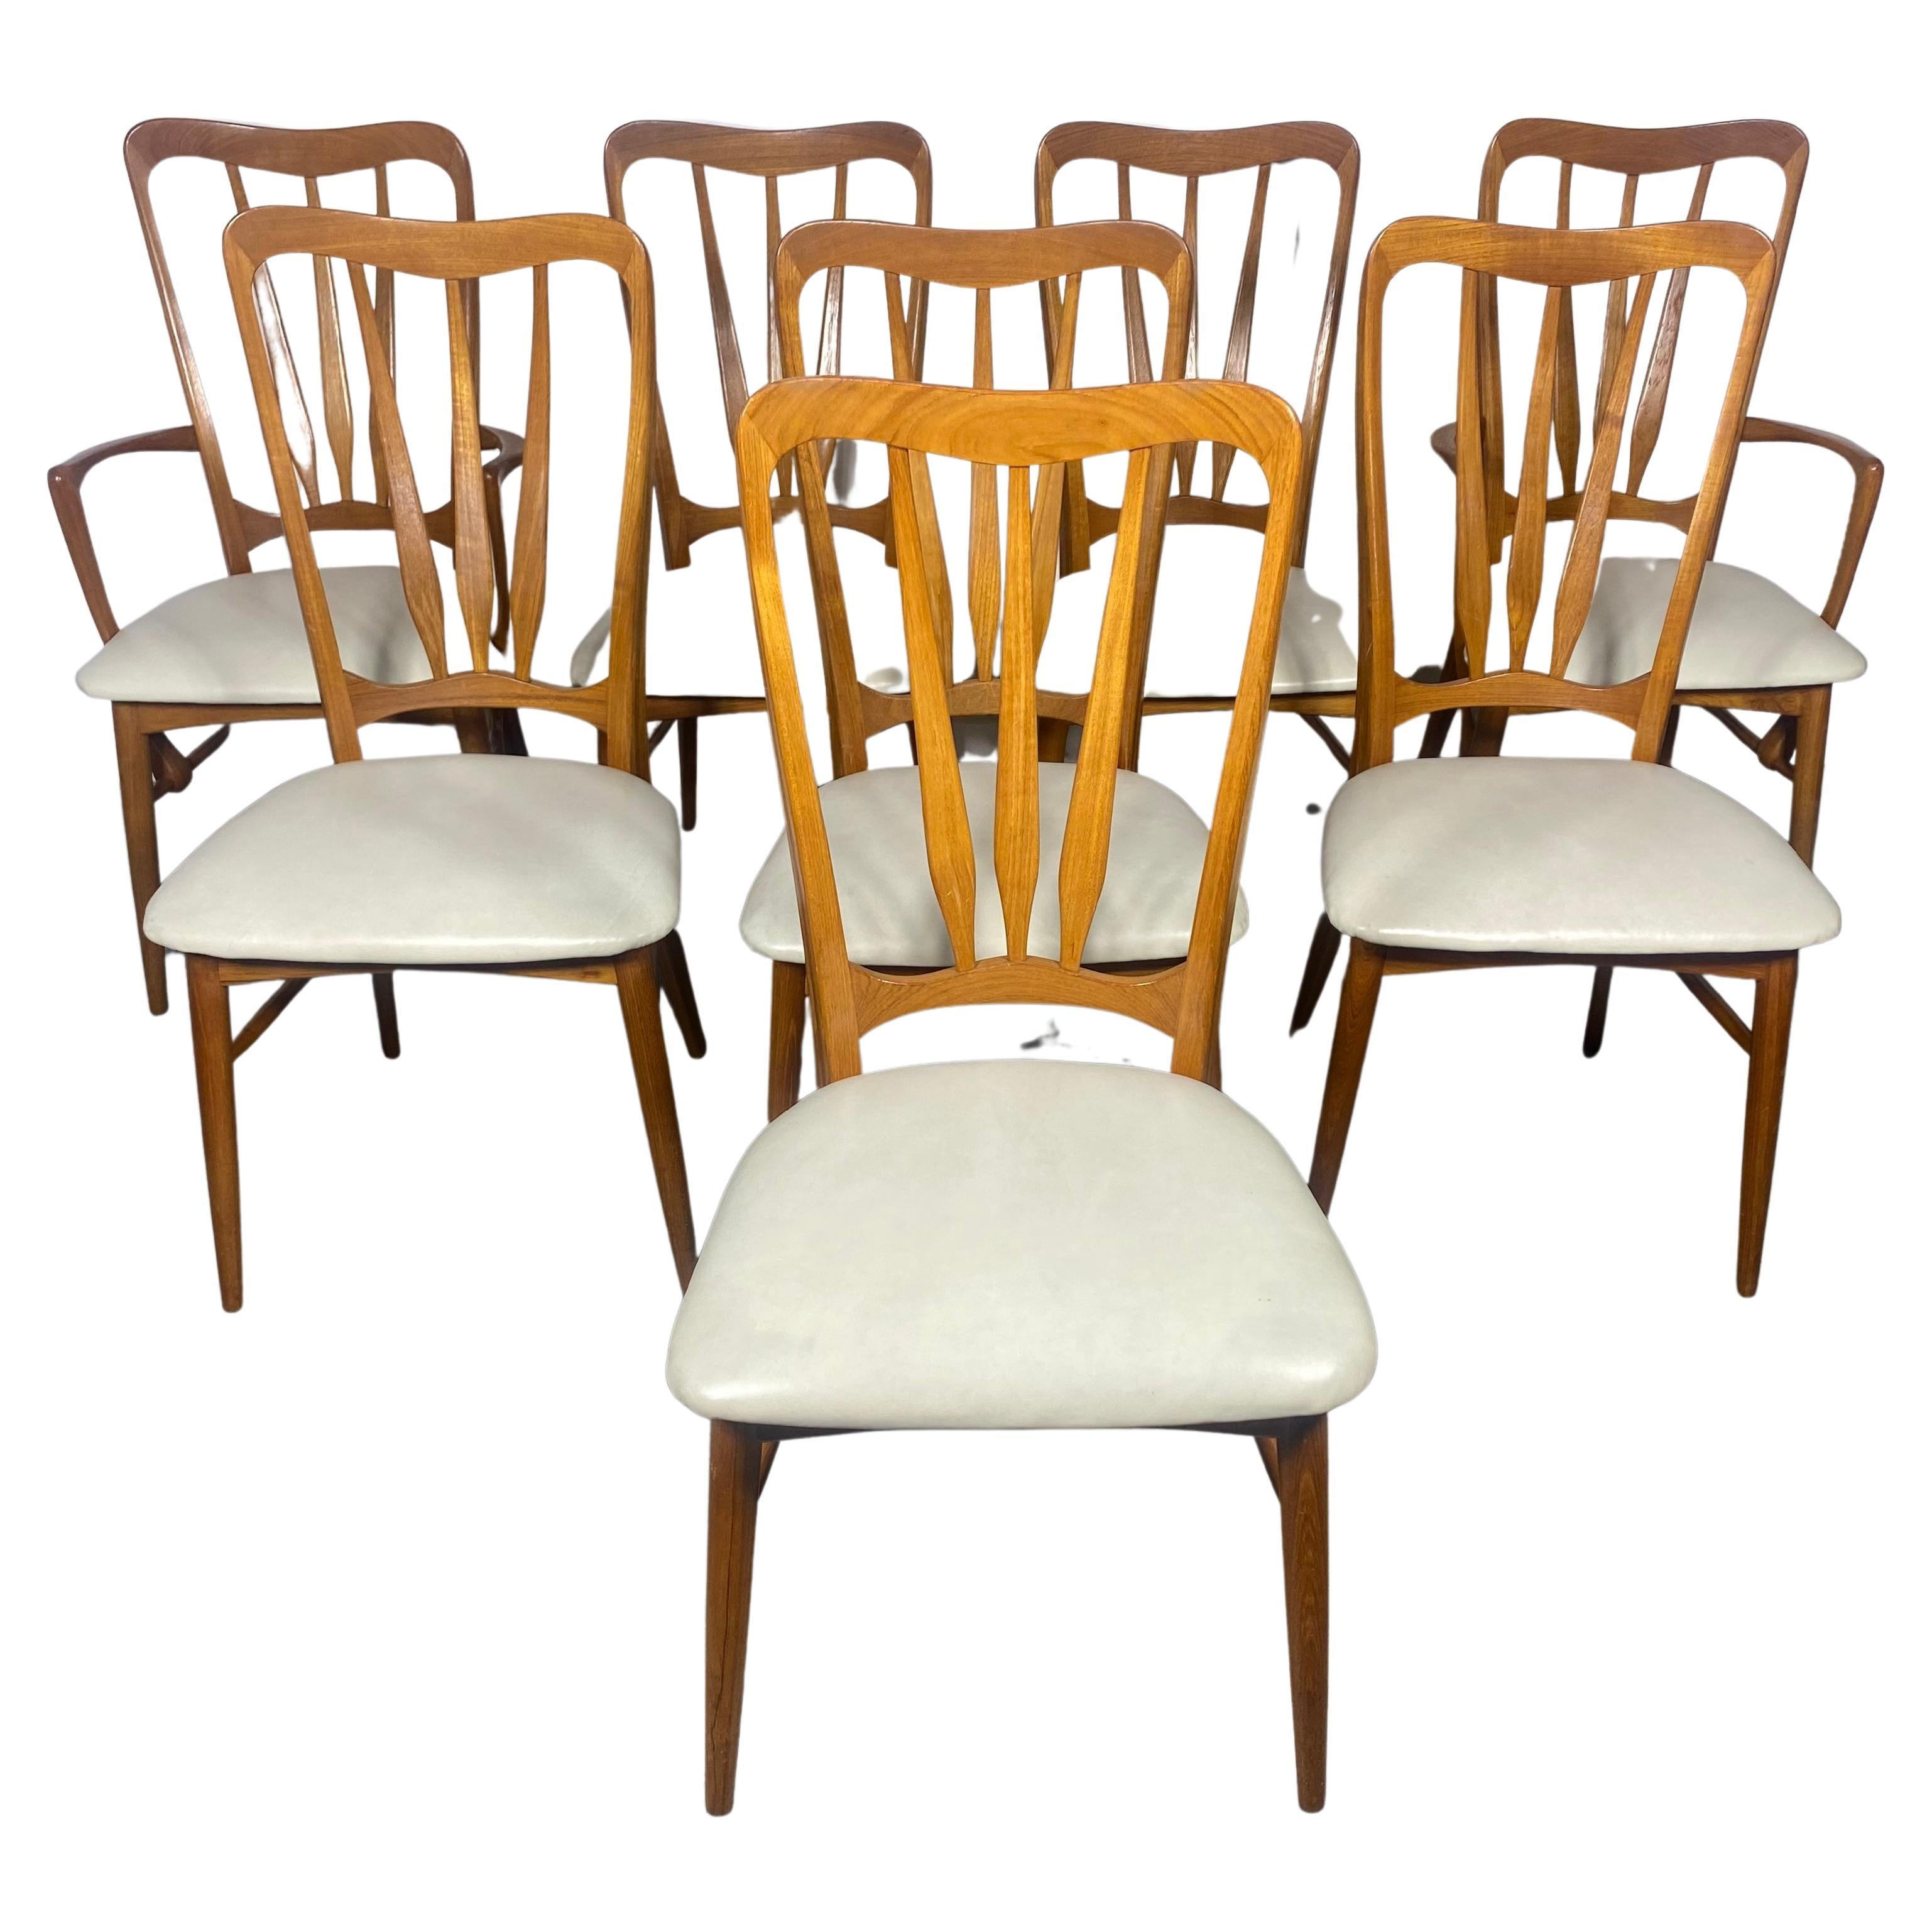 Set of Eight Dining Chairs by Niels Koefoed for Koefoeds Hornslet Denmark